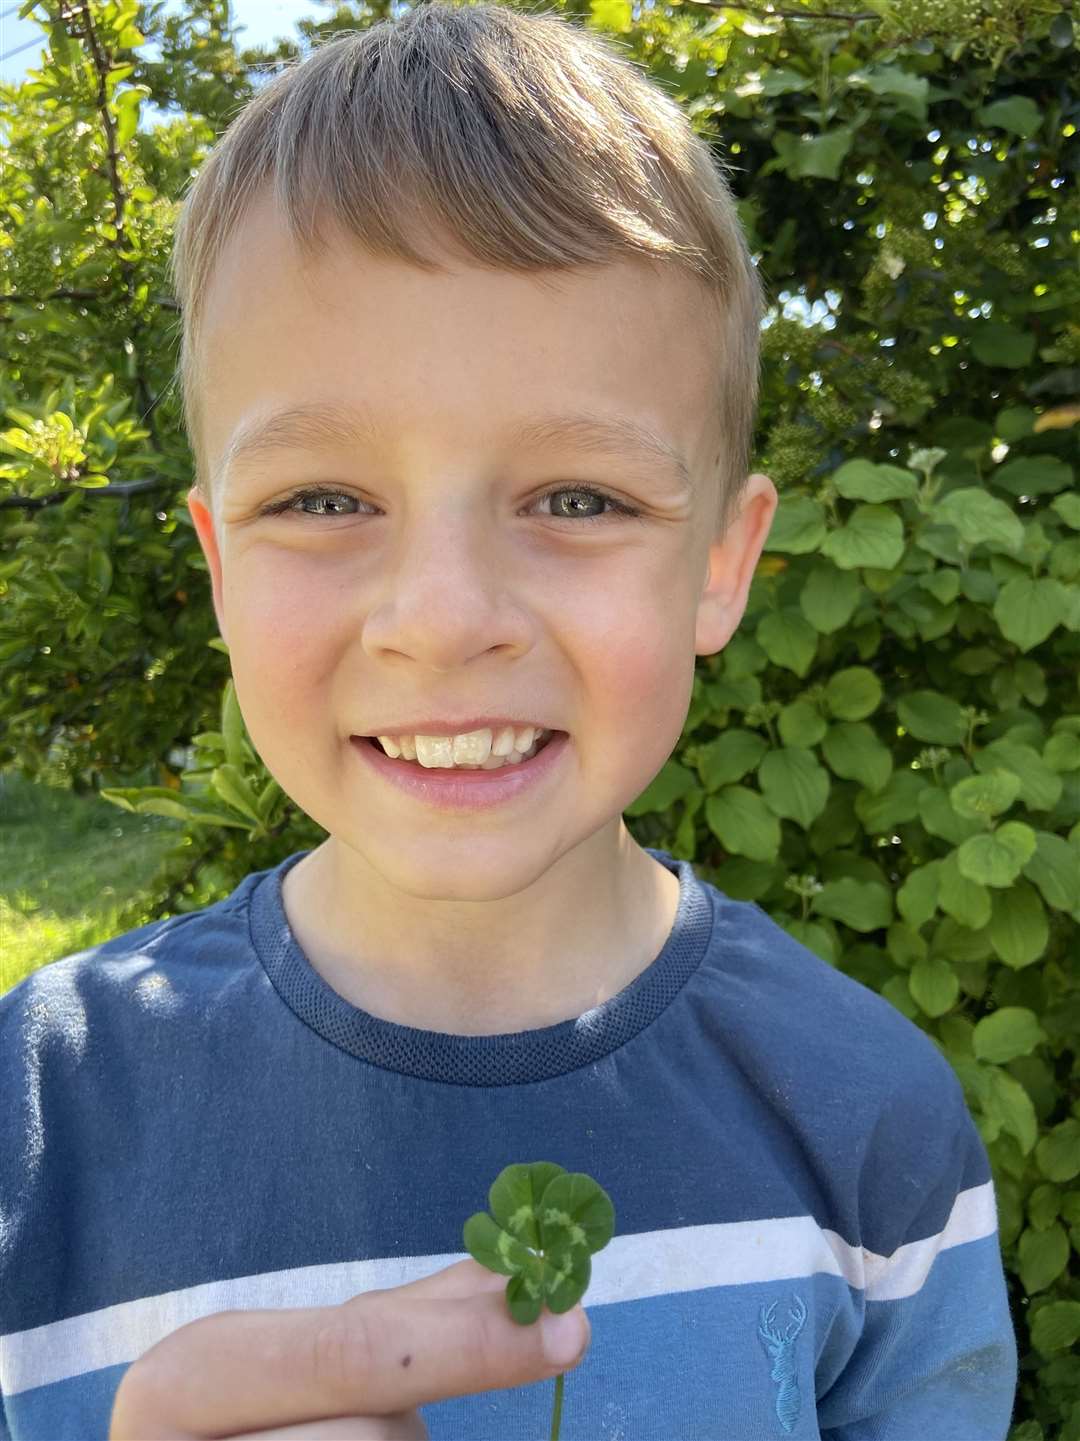 Theodore Webb found the rare clover within a minute